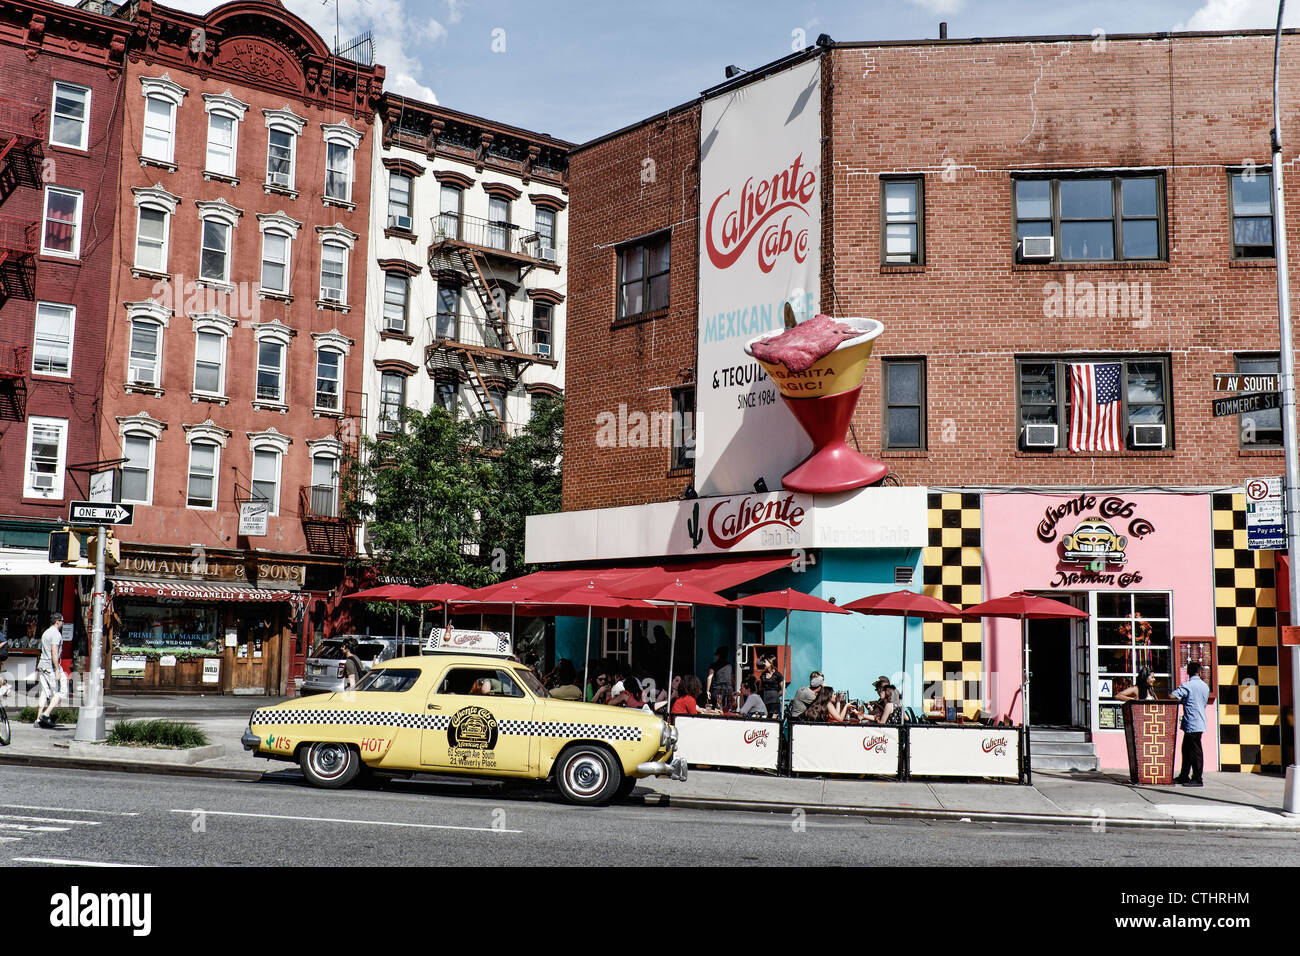 Caliente Cab, Mexican Restaurant, West Village, 7th Ave South, New York Stock Photo